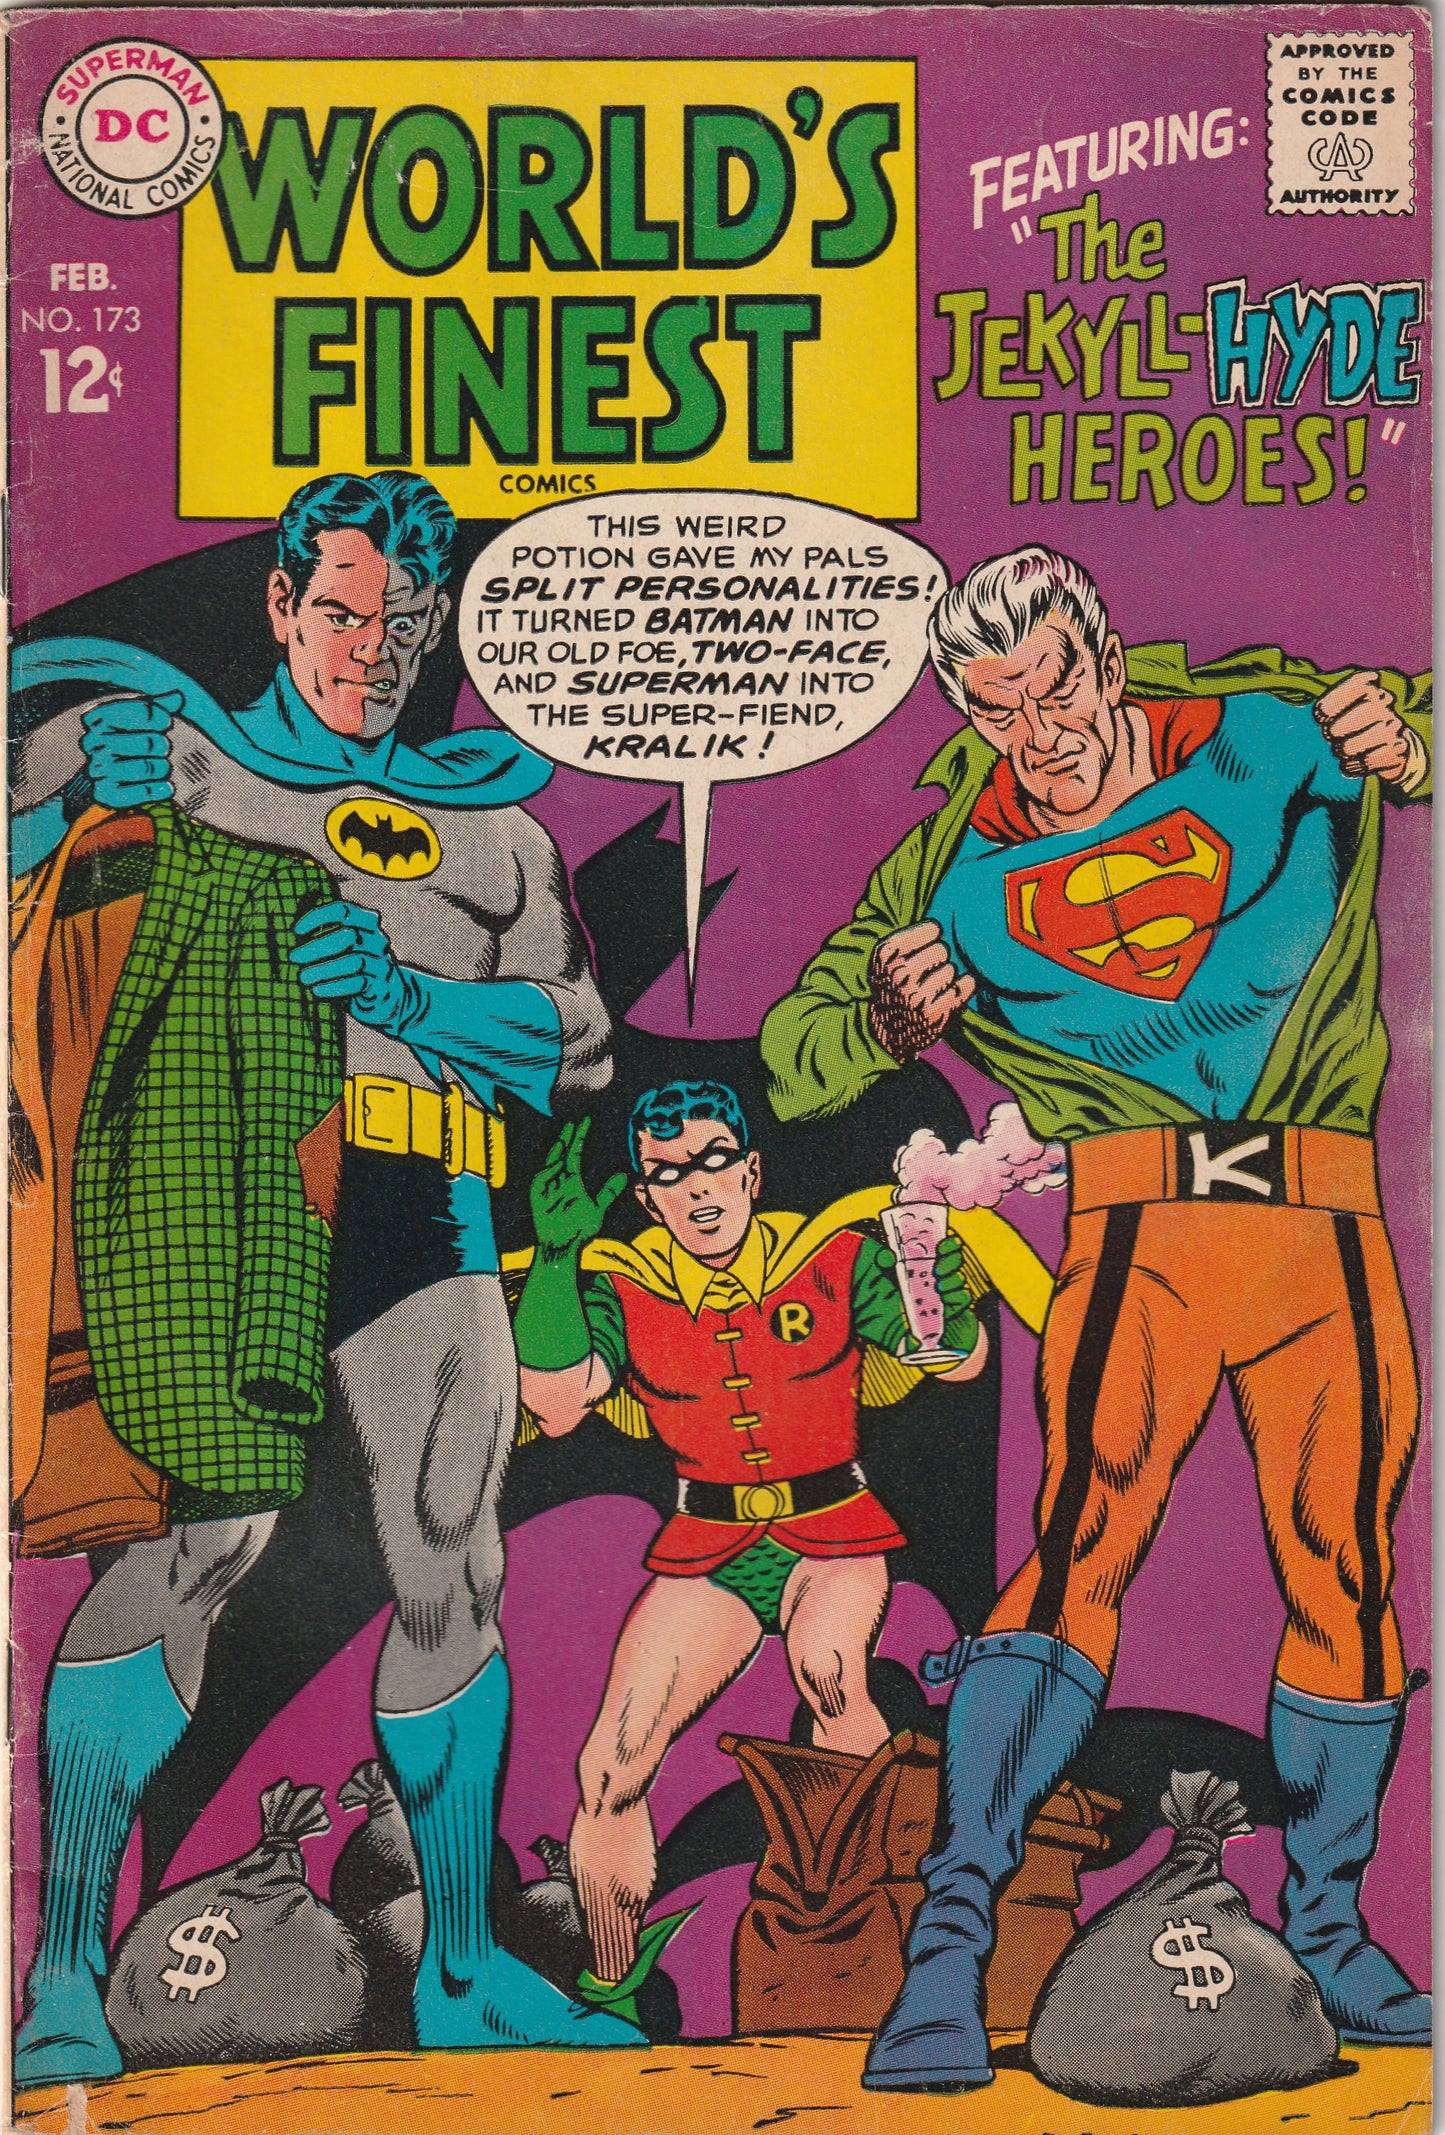 World's Finest #173 (1968) - 1st Silver Age Appearance Two Face as Batman becomes Two-Face in story